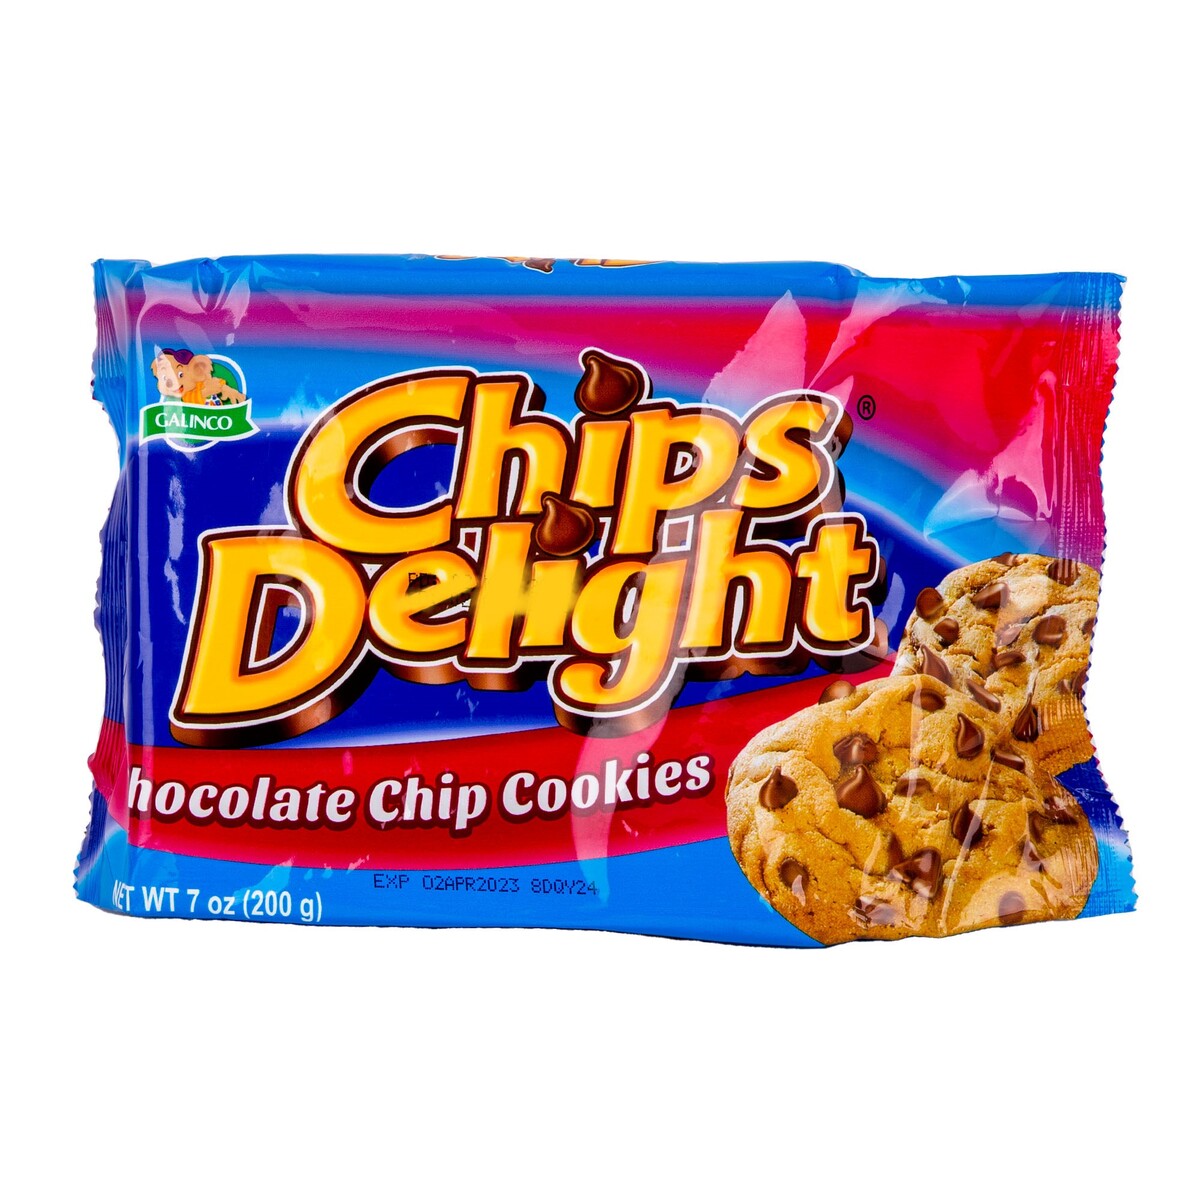 Galinco Chips Delights Chocolate Chips Cookies 200 g